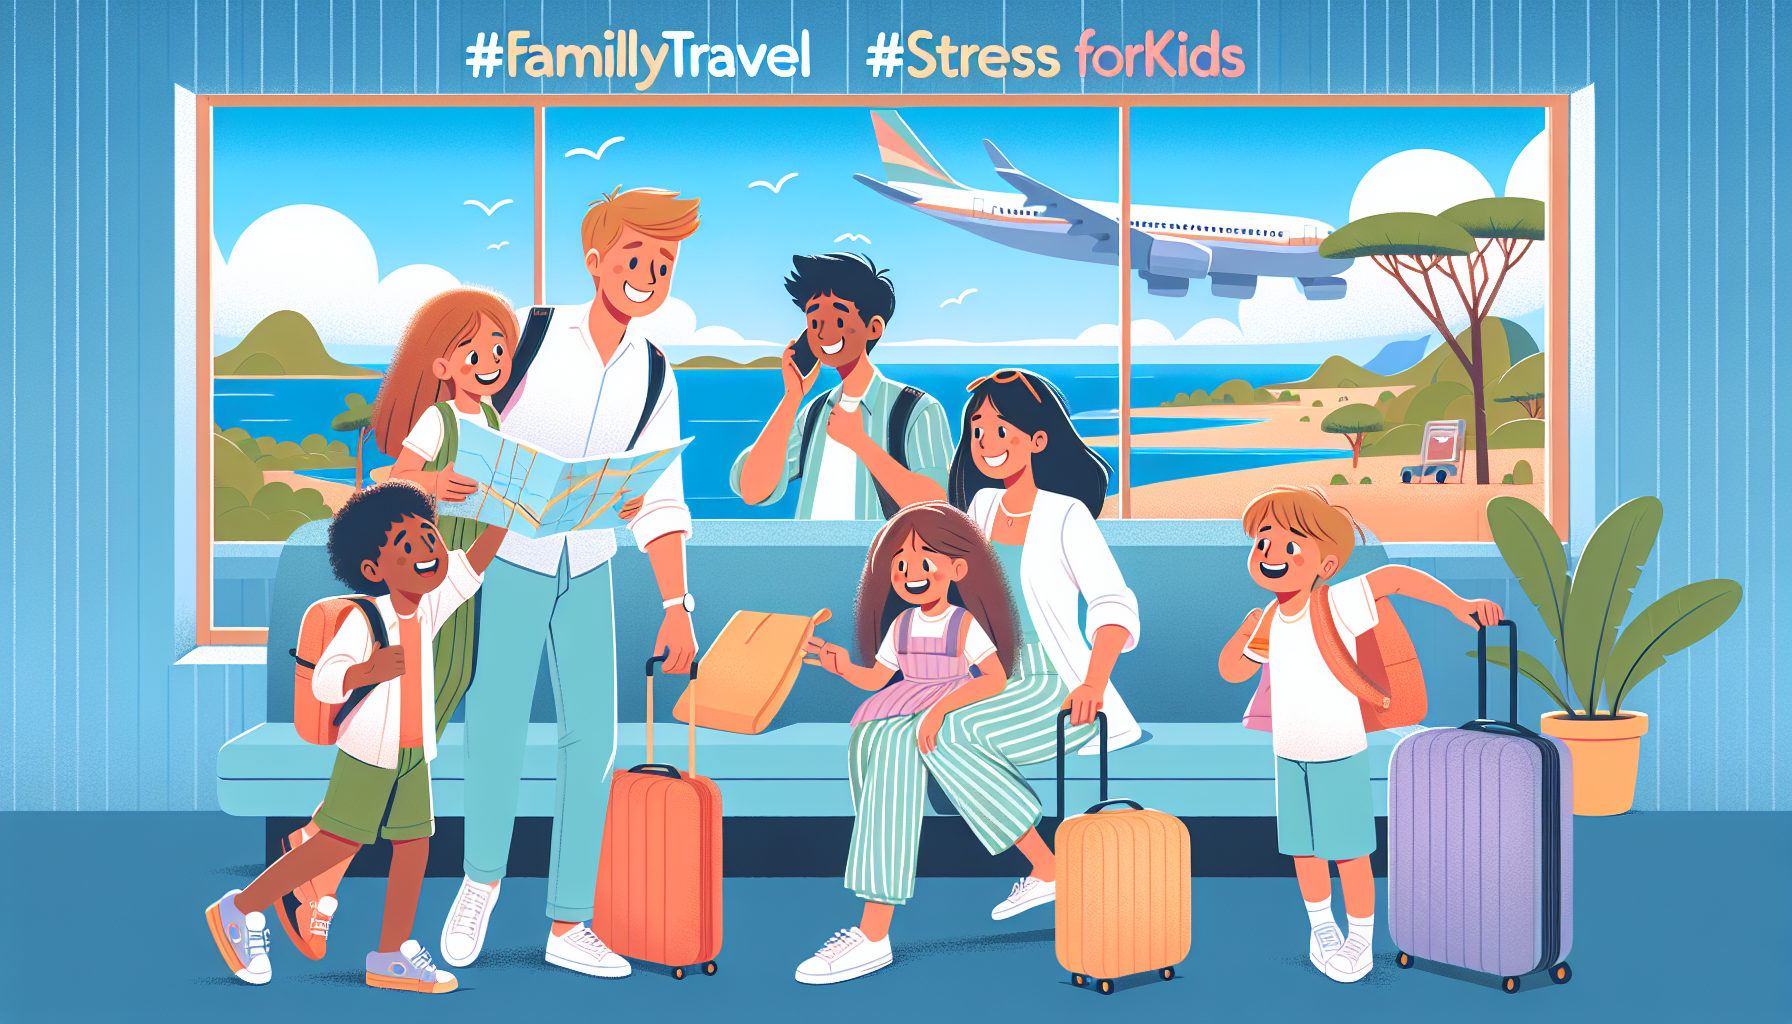 discover helpful tips and strategies for making traveling with children enjoyable and hassle-free. find out how to make the journey fun and stress-free for the whole family.